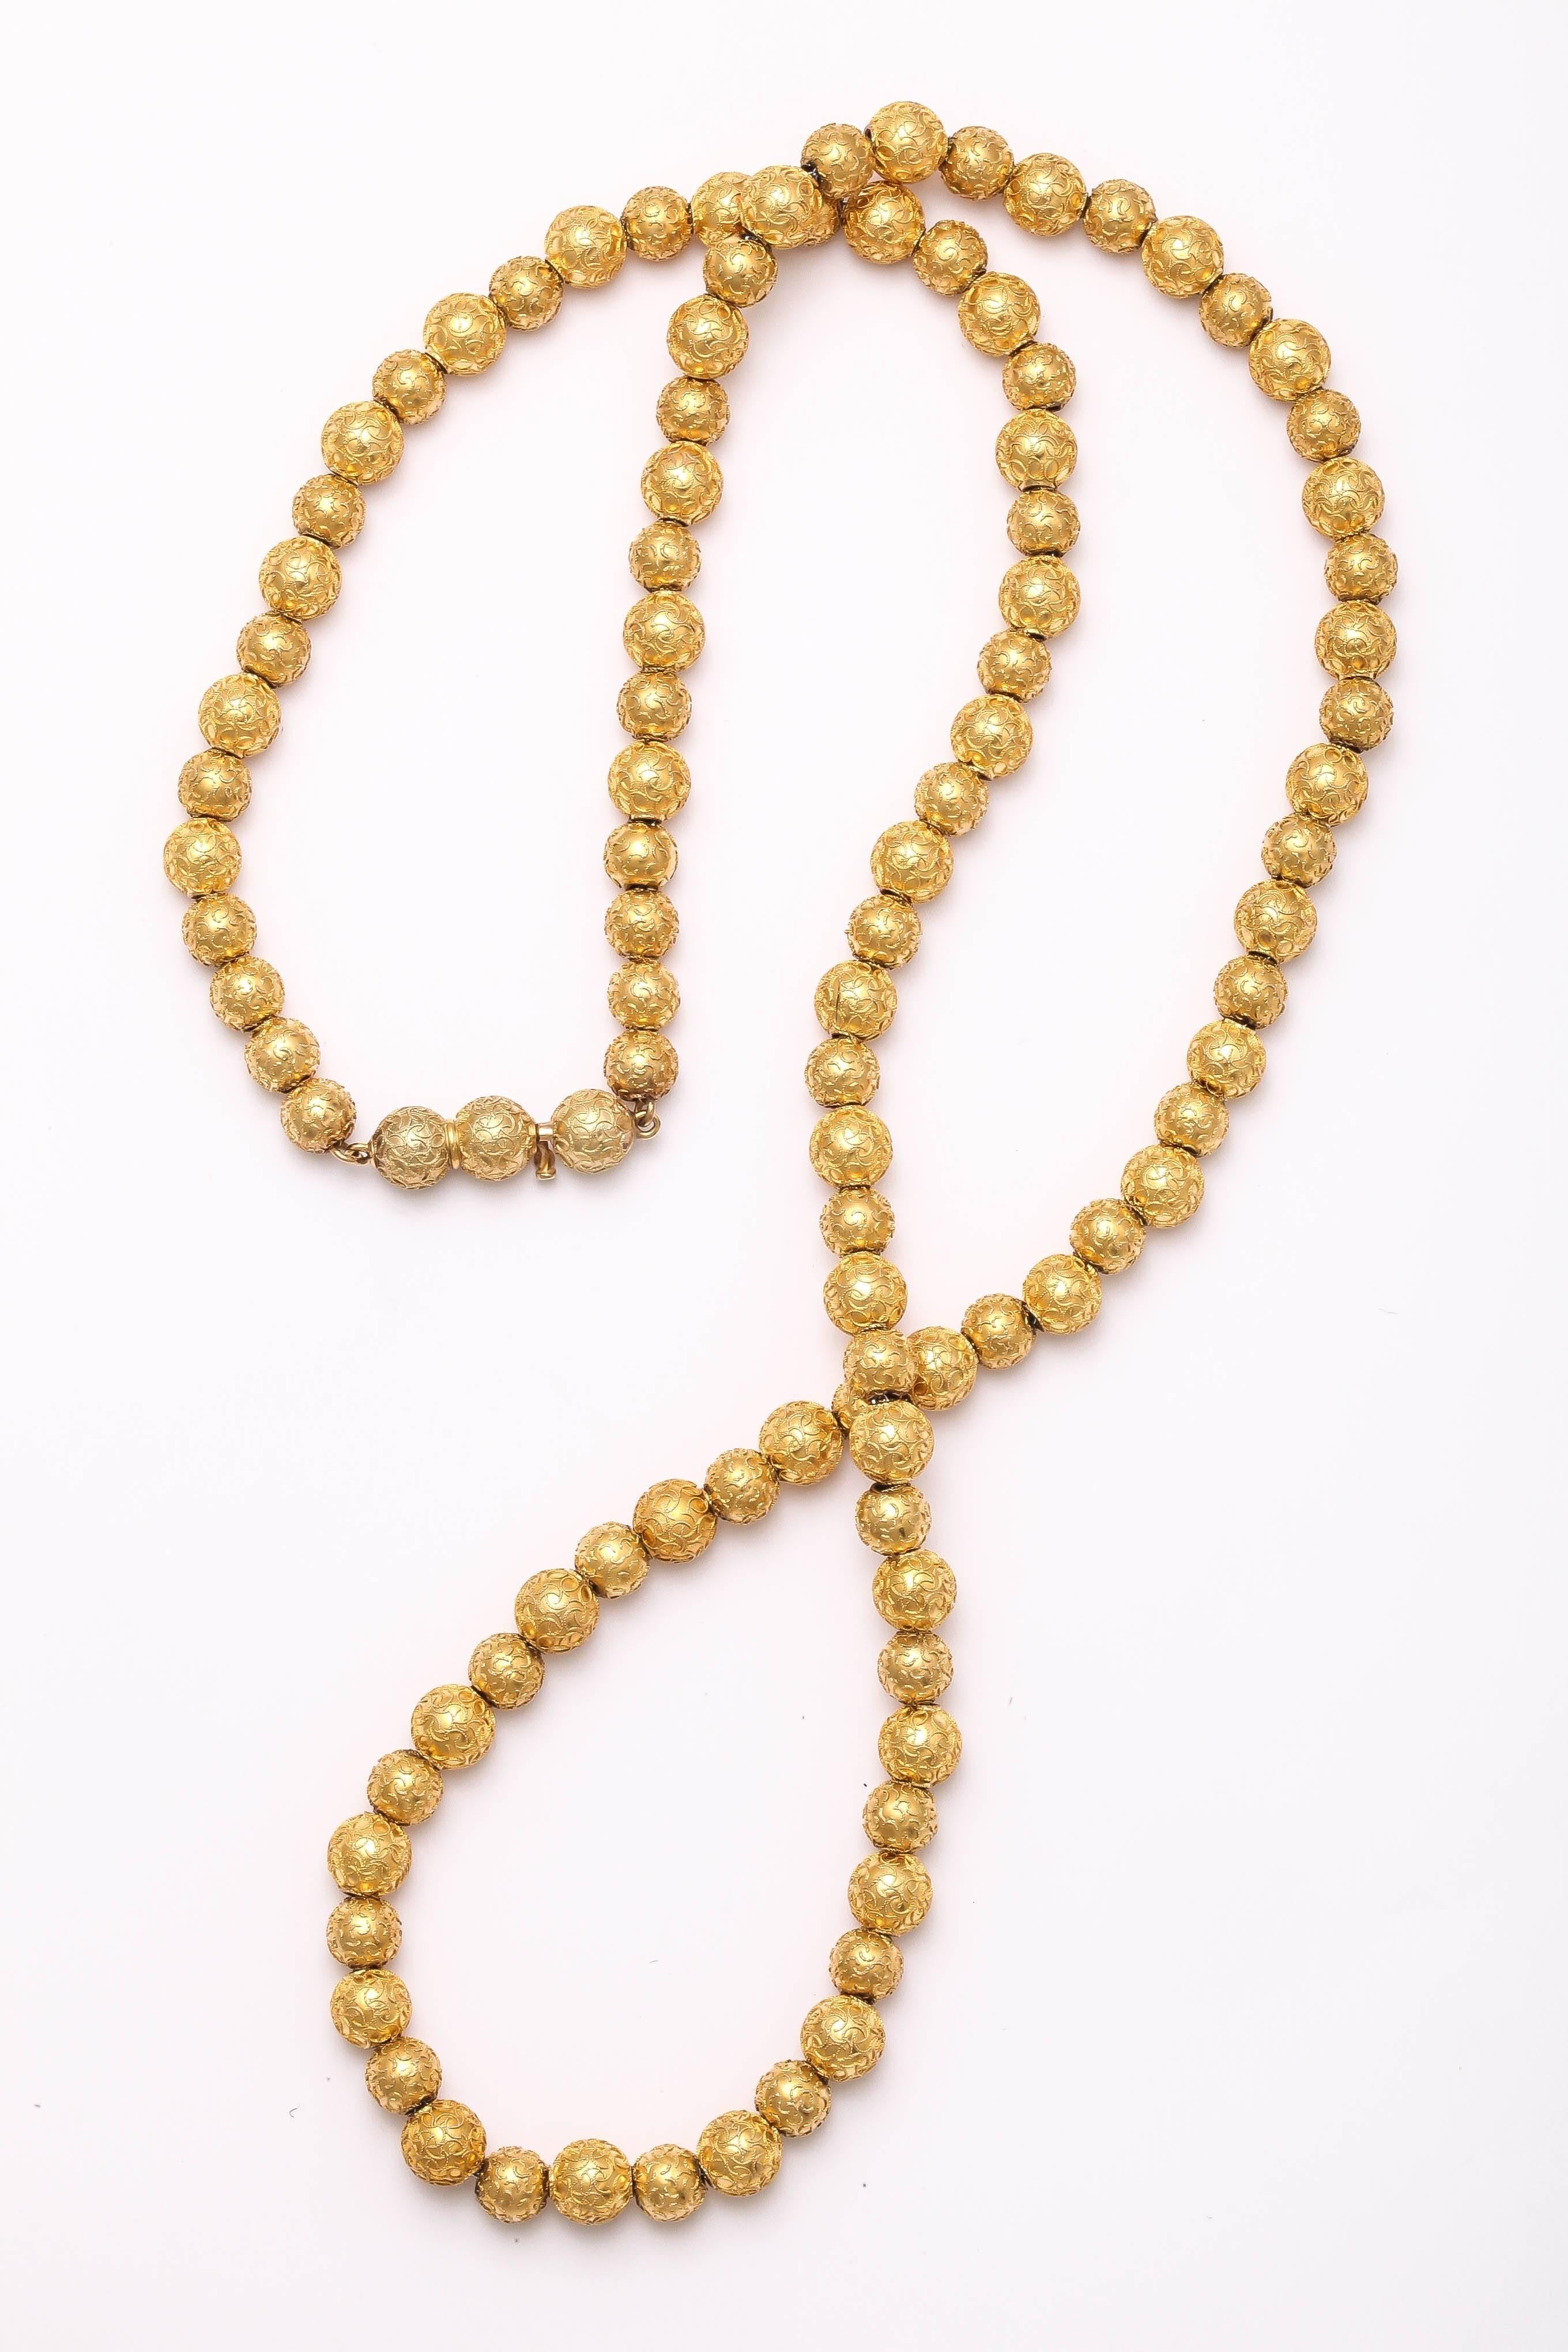 Victorian Intricately Engraved Gold Bead Necklace c.1870